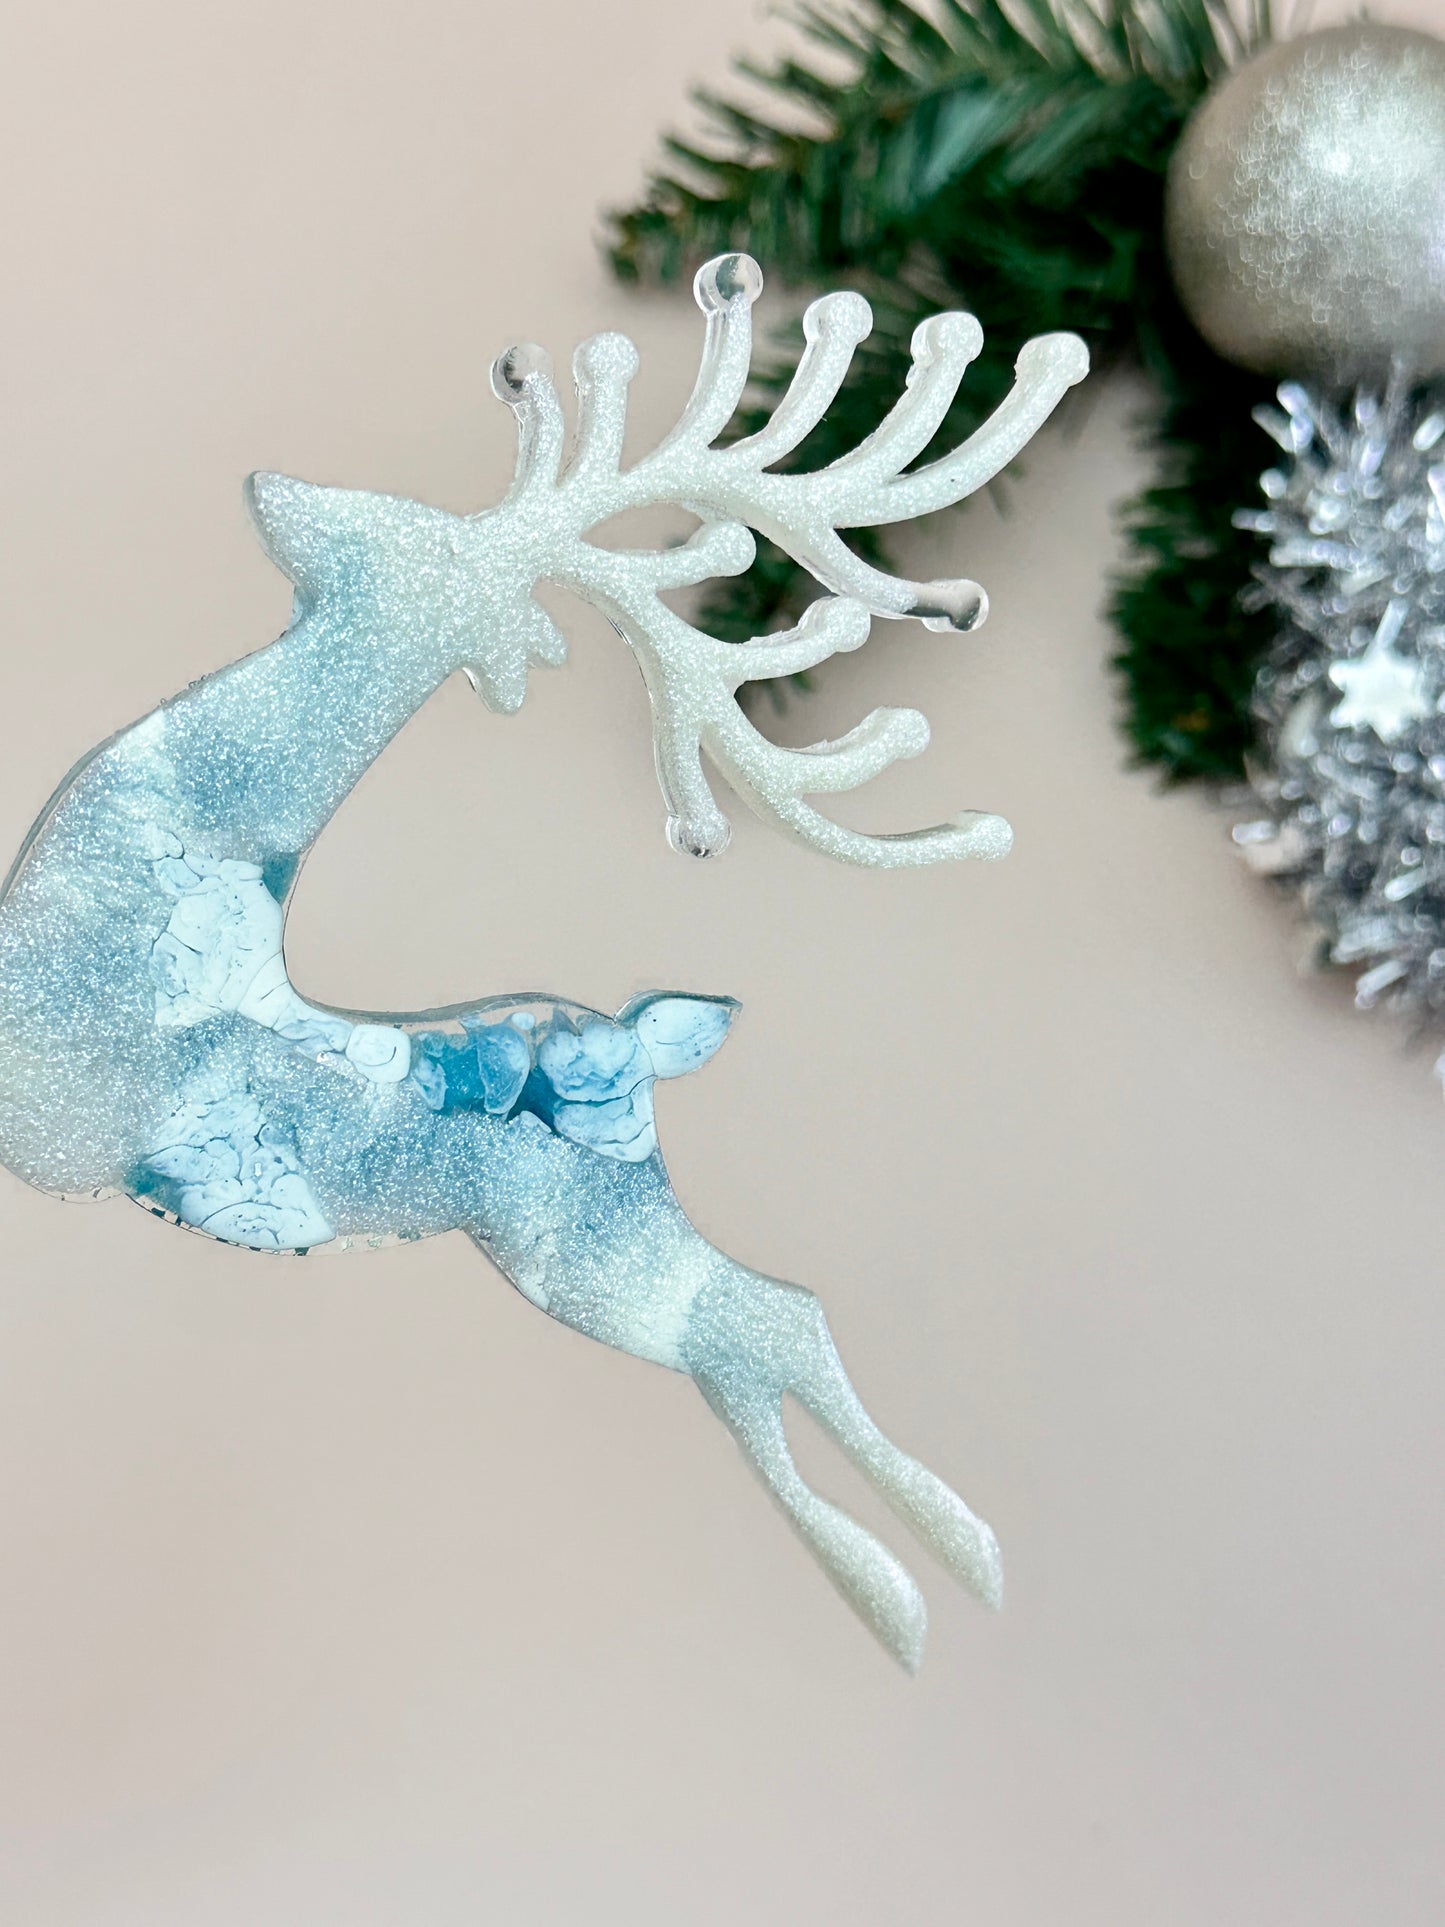 Christmas Deer: Large Silicone Resin Mold for Festive Pendants, DIY Crafts, and Home Decor